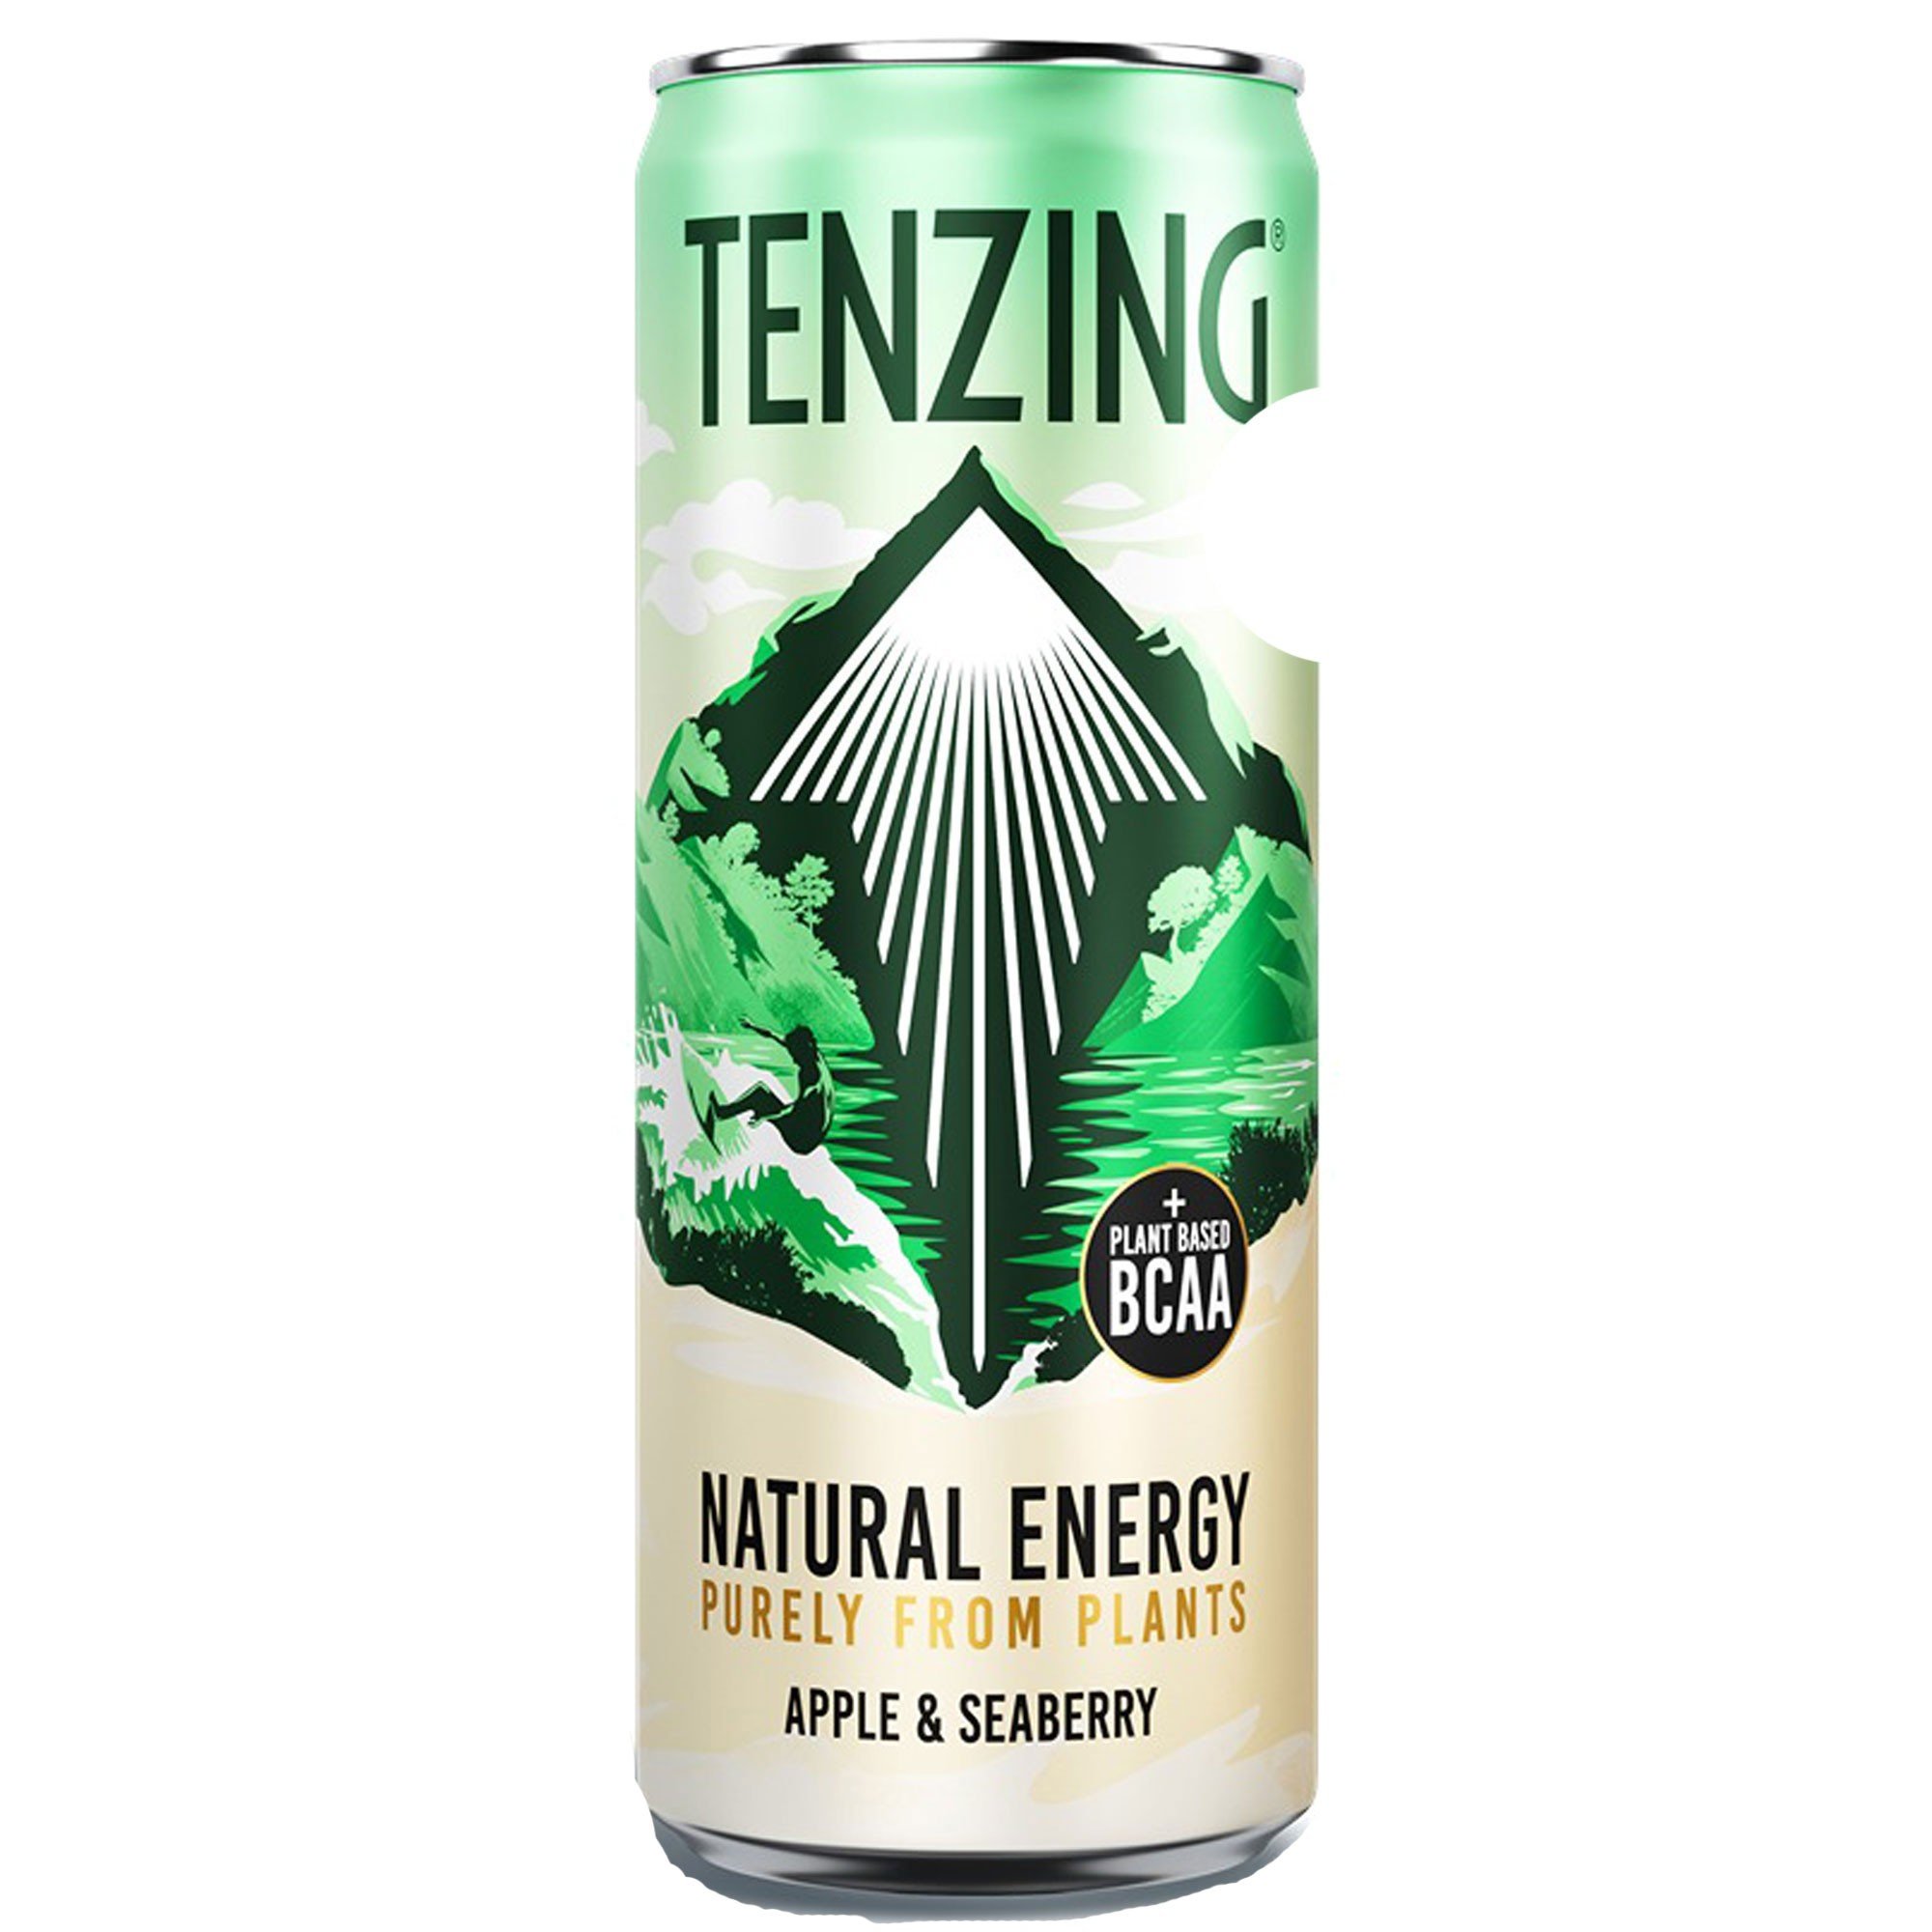 Tenzing Natural Energy Drink Natural BCAA Apple & Seaberry 330ml RRP £2 CLEARANCE XL 89p or 2 for £1.50